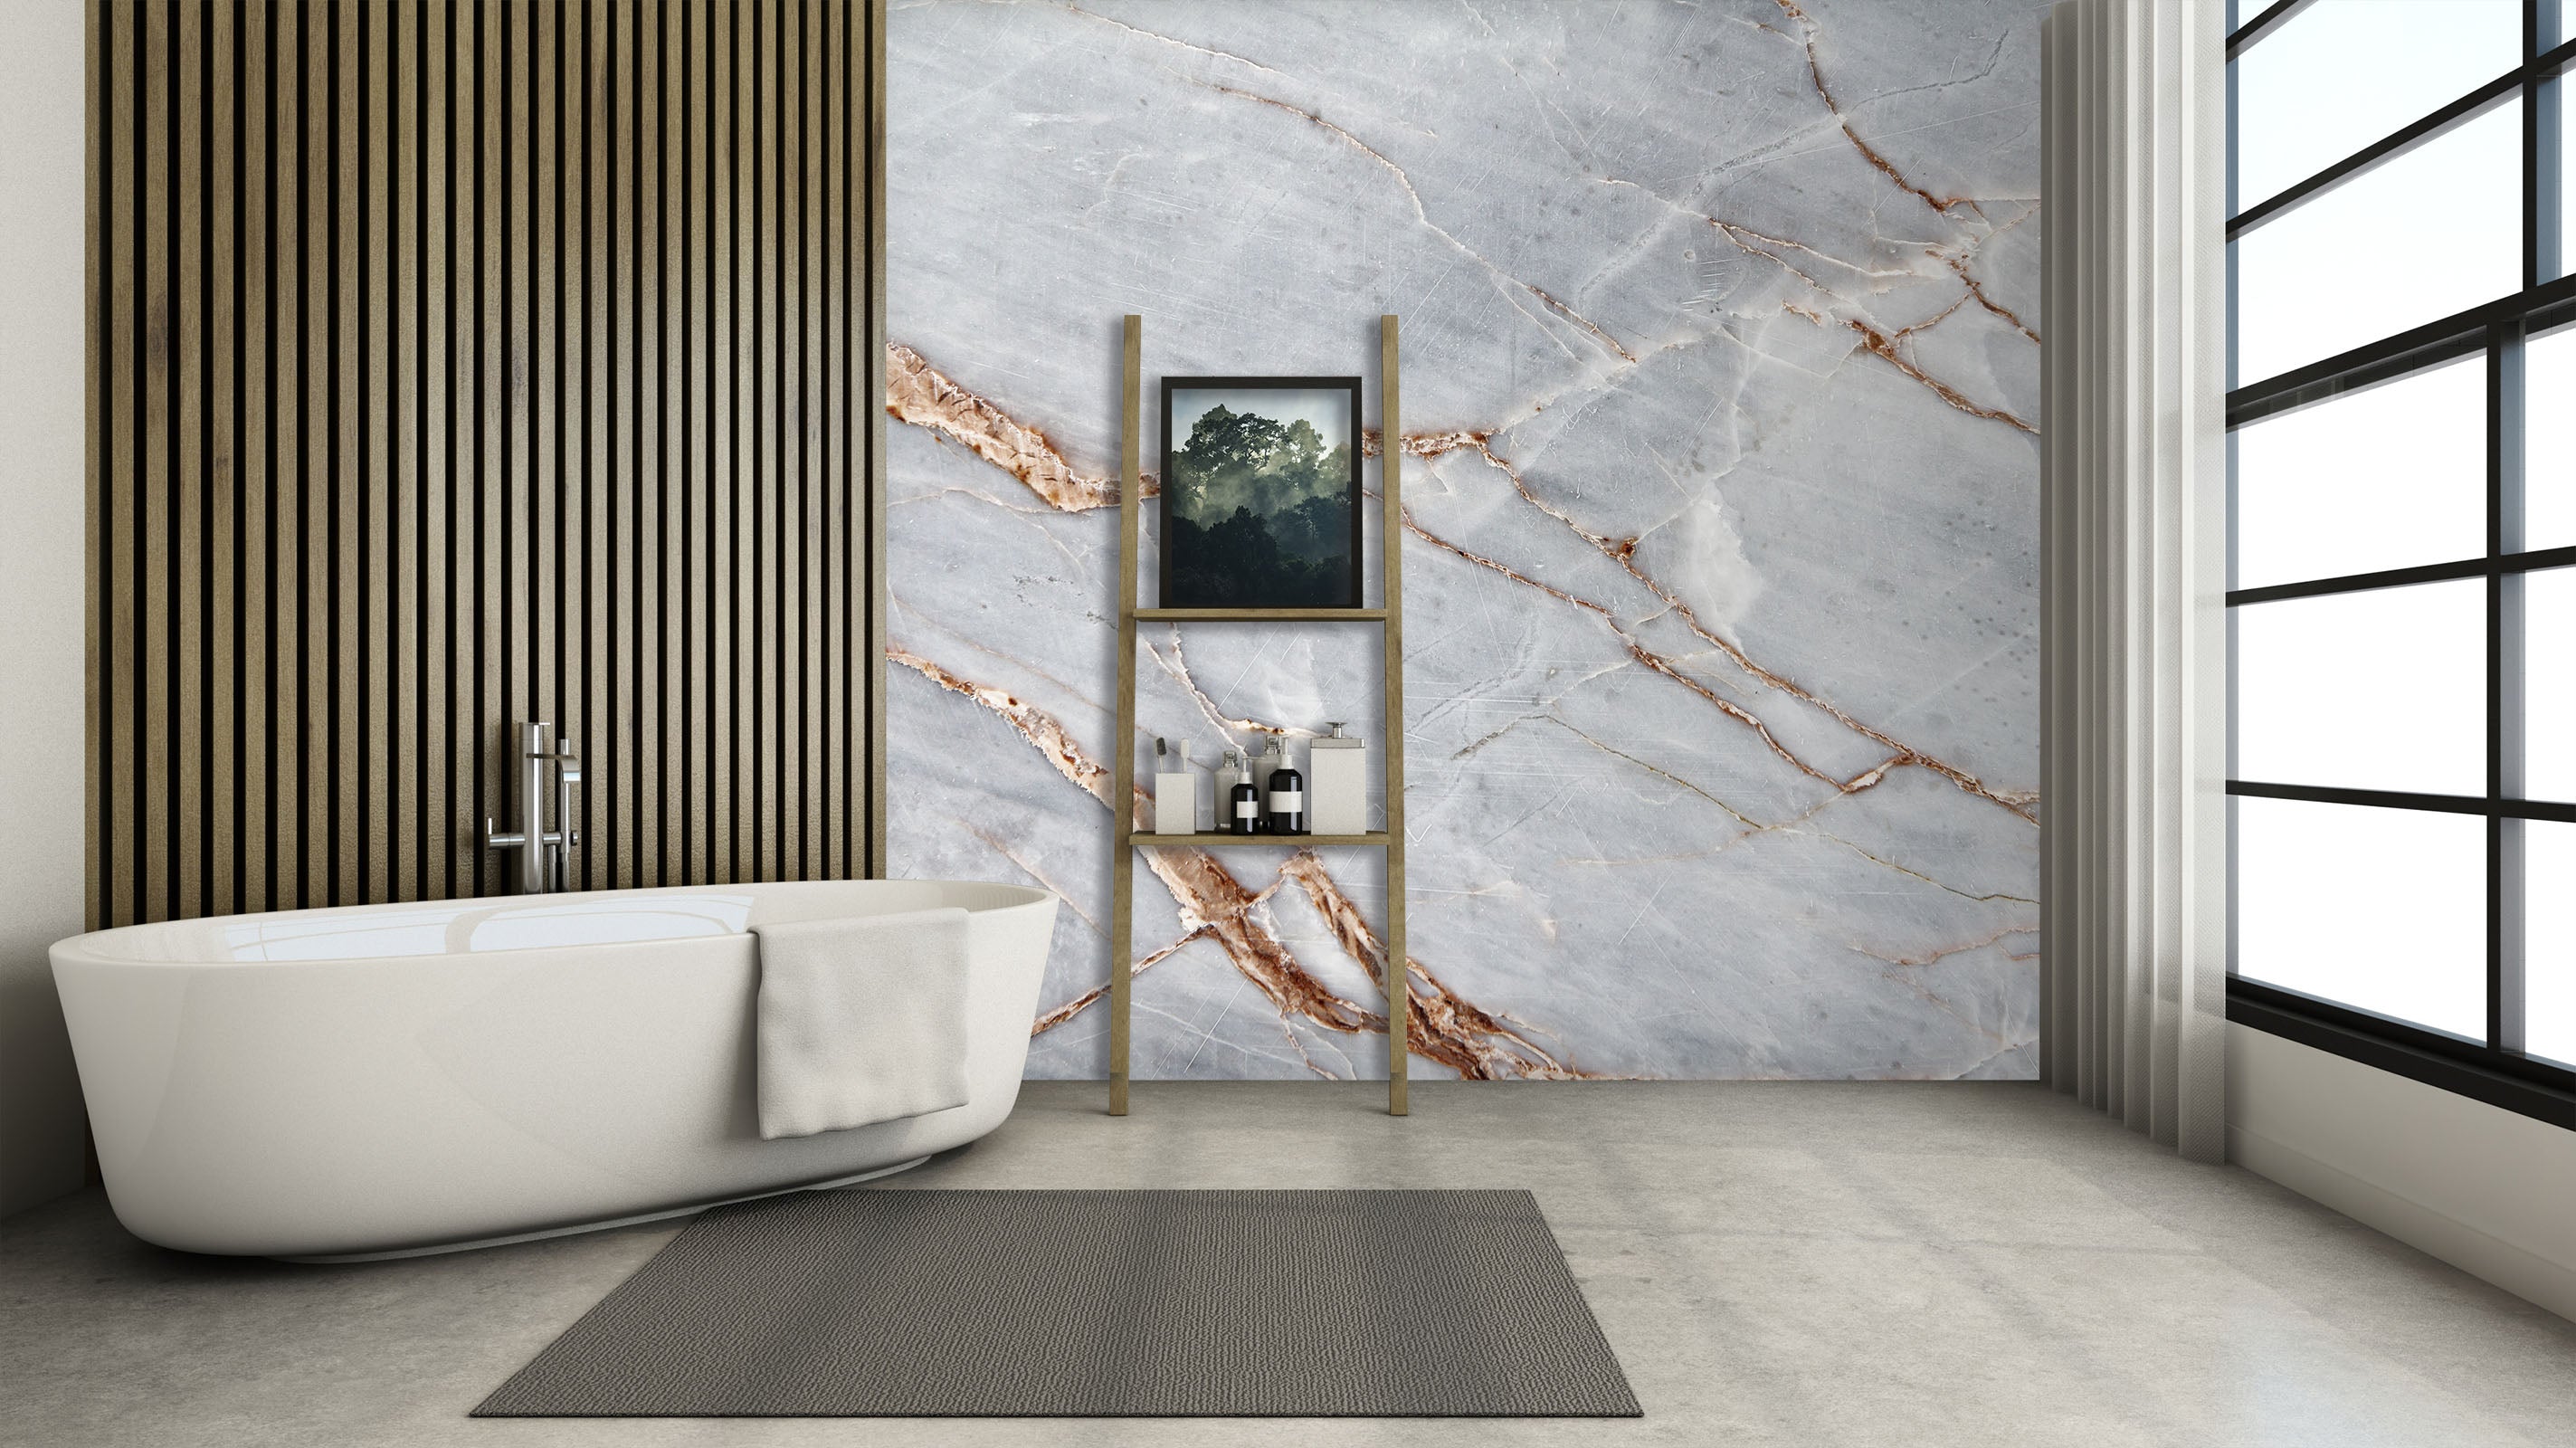 3D White Marble Crack 62 Wall Murals